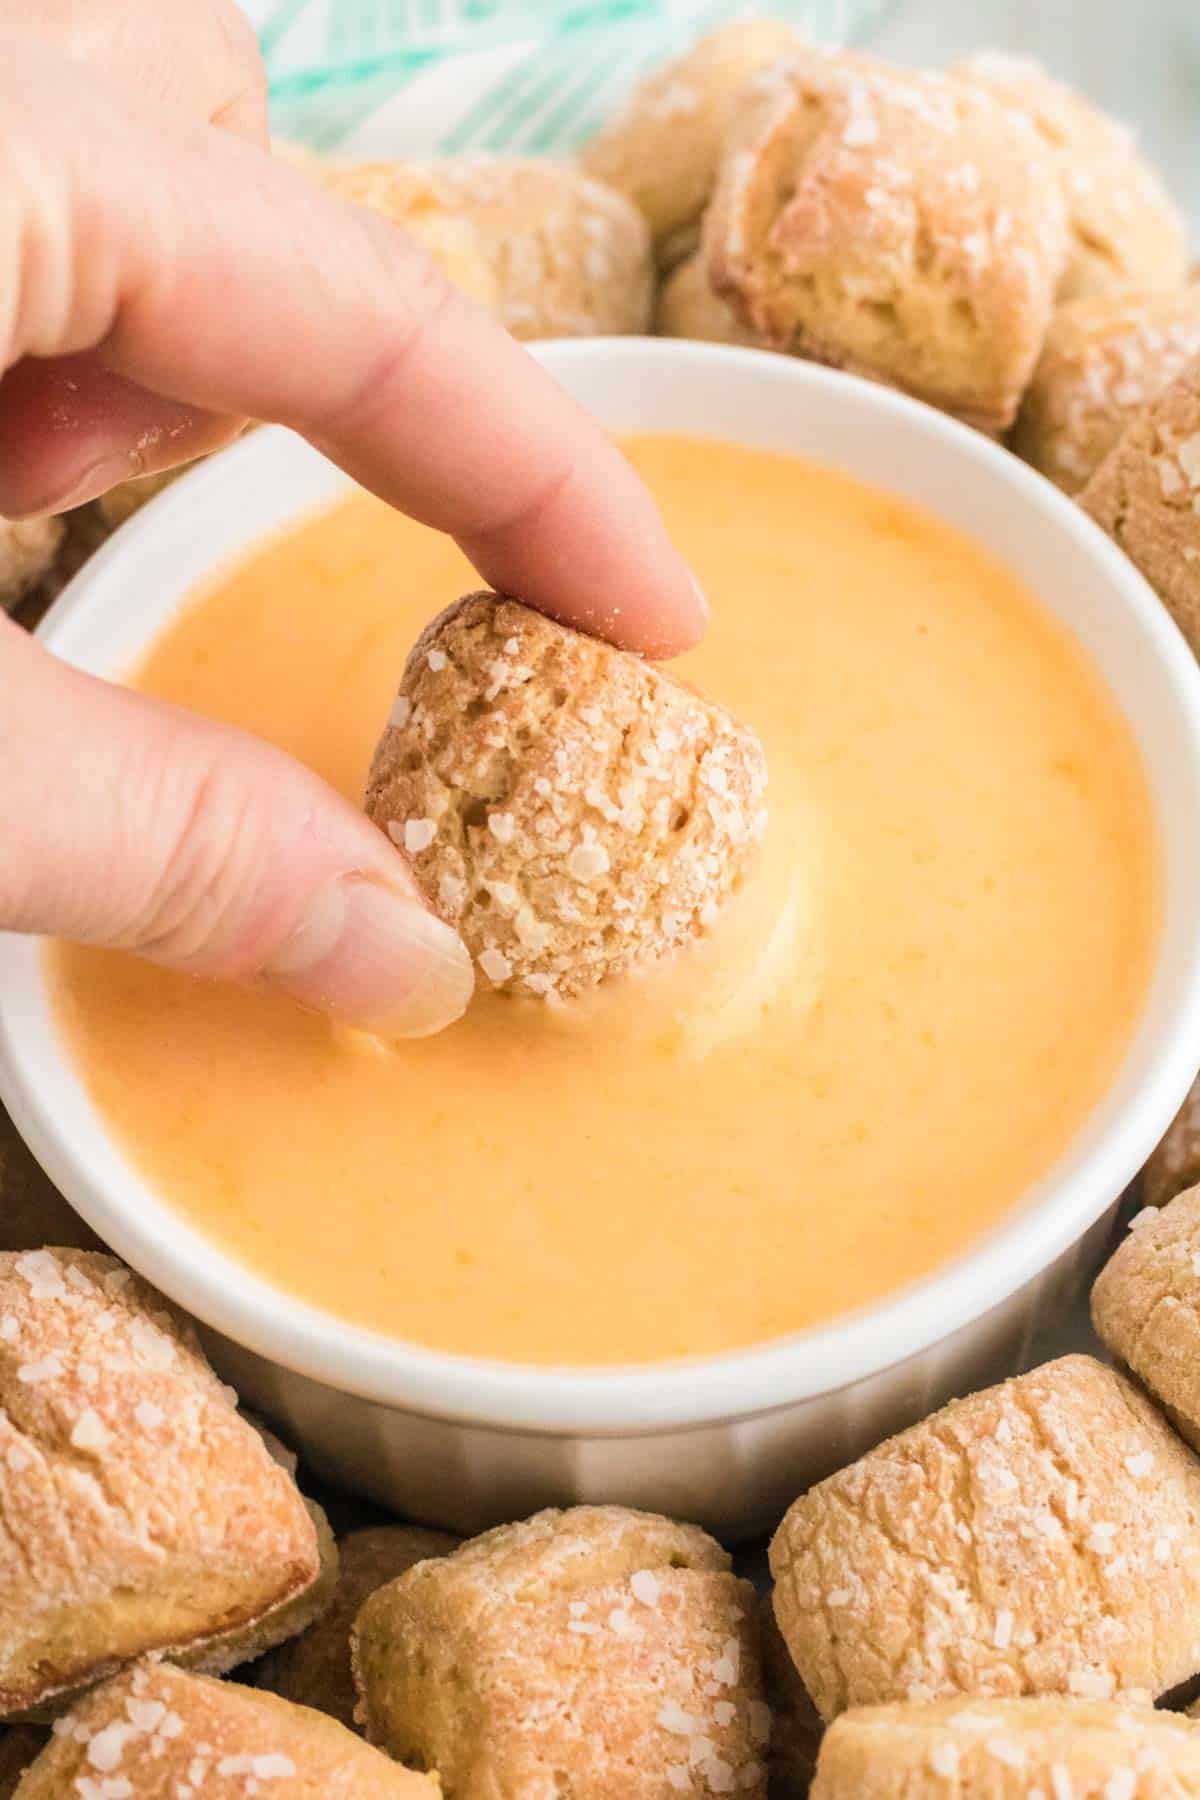 A pretzel nugget is dipped into a bowl of cheese sauce.